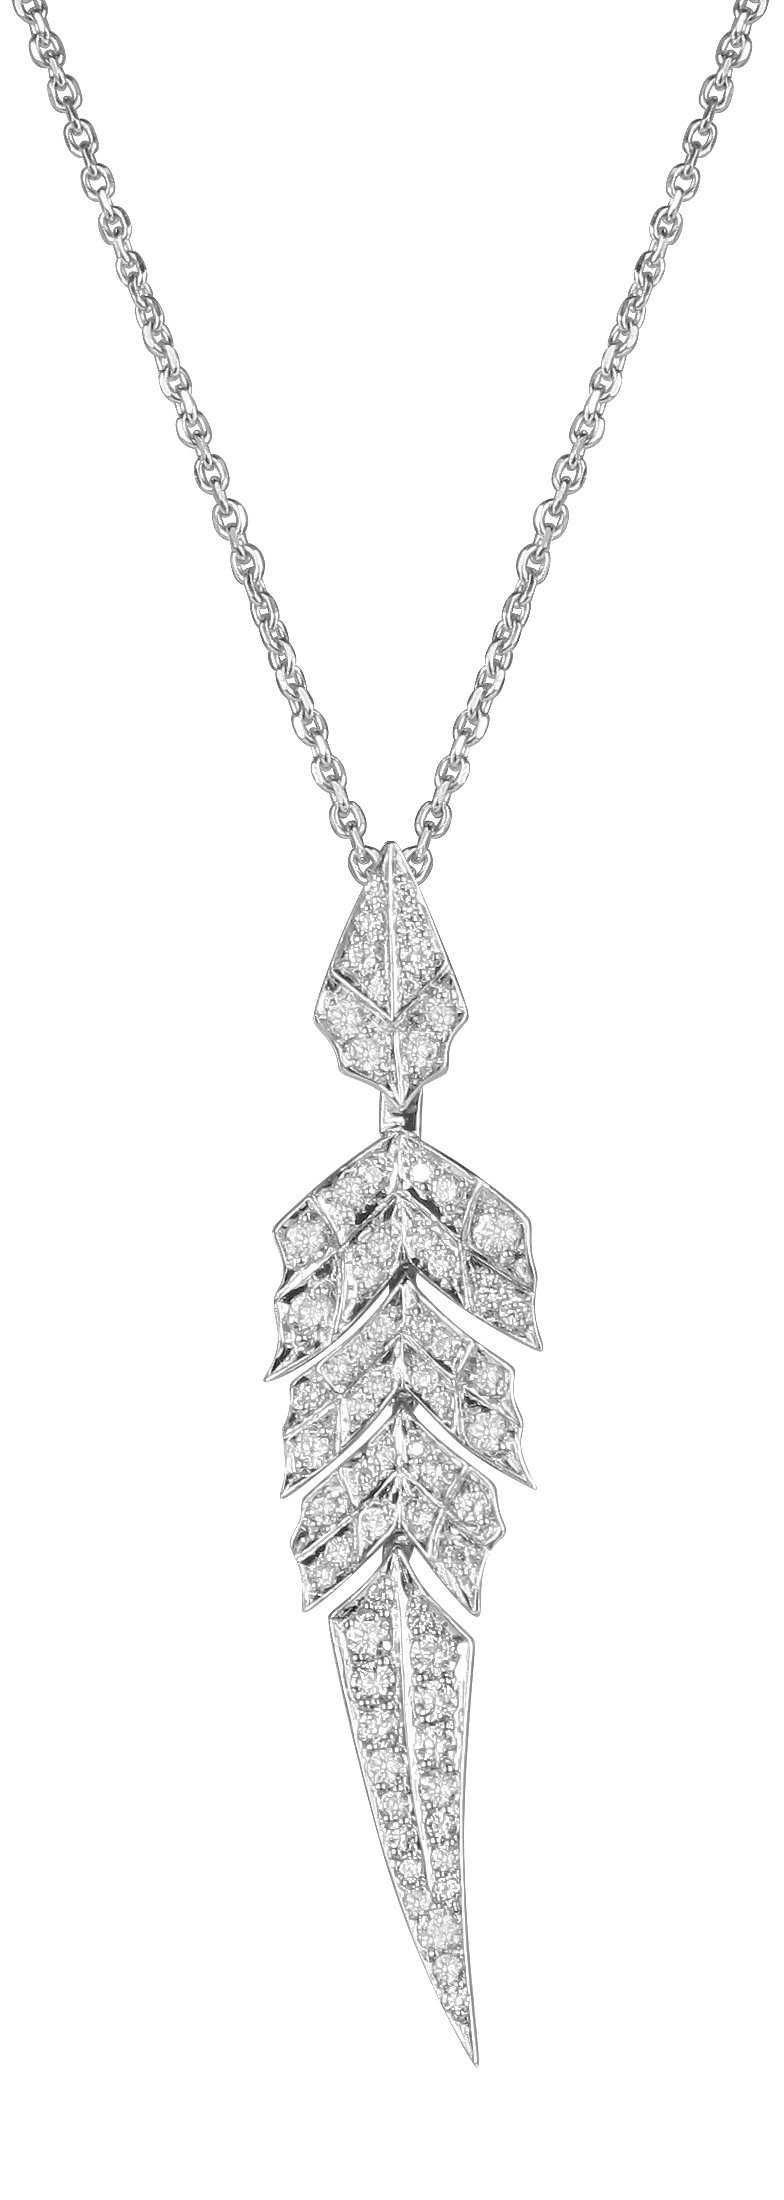 Magnipheasant Short Tail Feather Drop Pendant Necklace with White Diamonds in 18kt White Gold